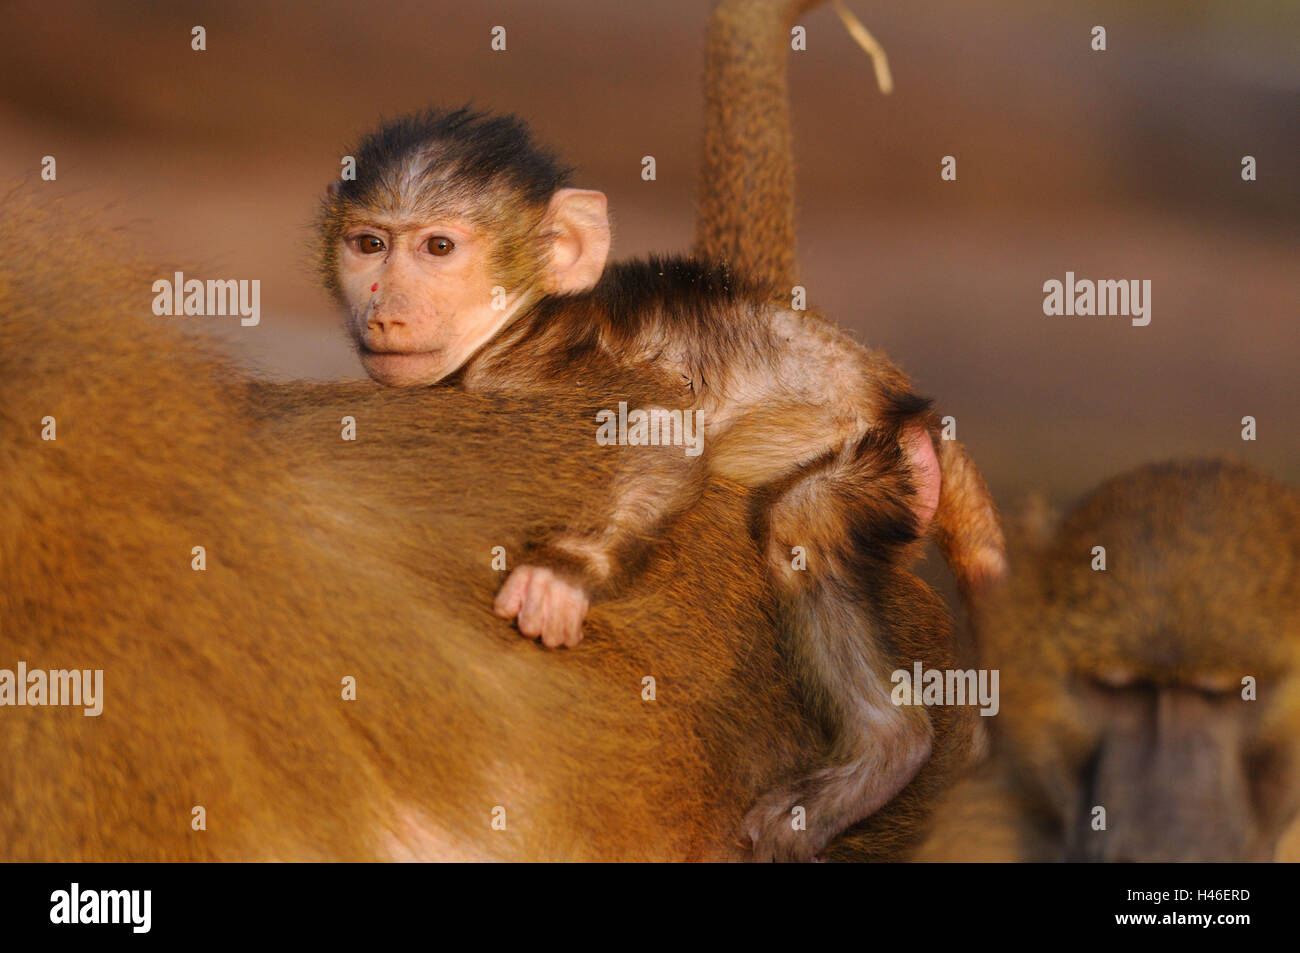 Guinea baboon, Papio papio, young animal, side view, backs, mother animal, lie, view in the camera, Stock Photo